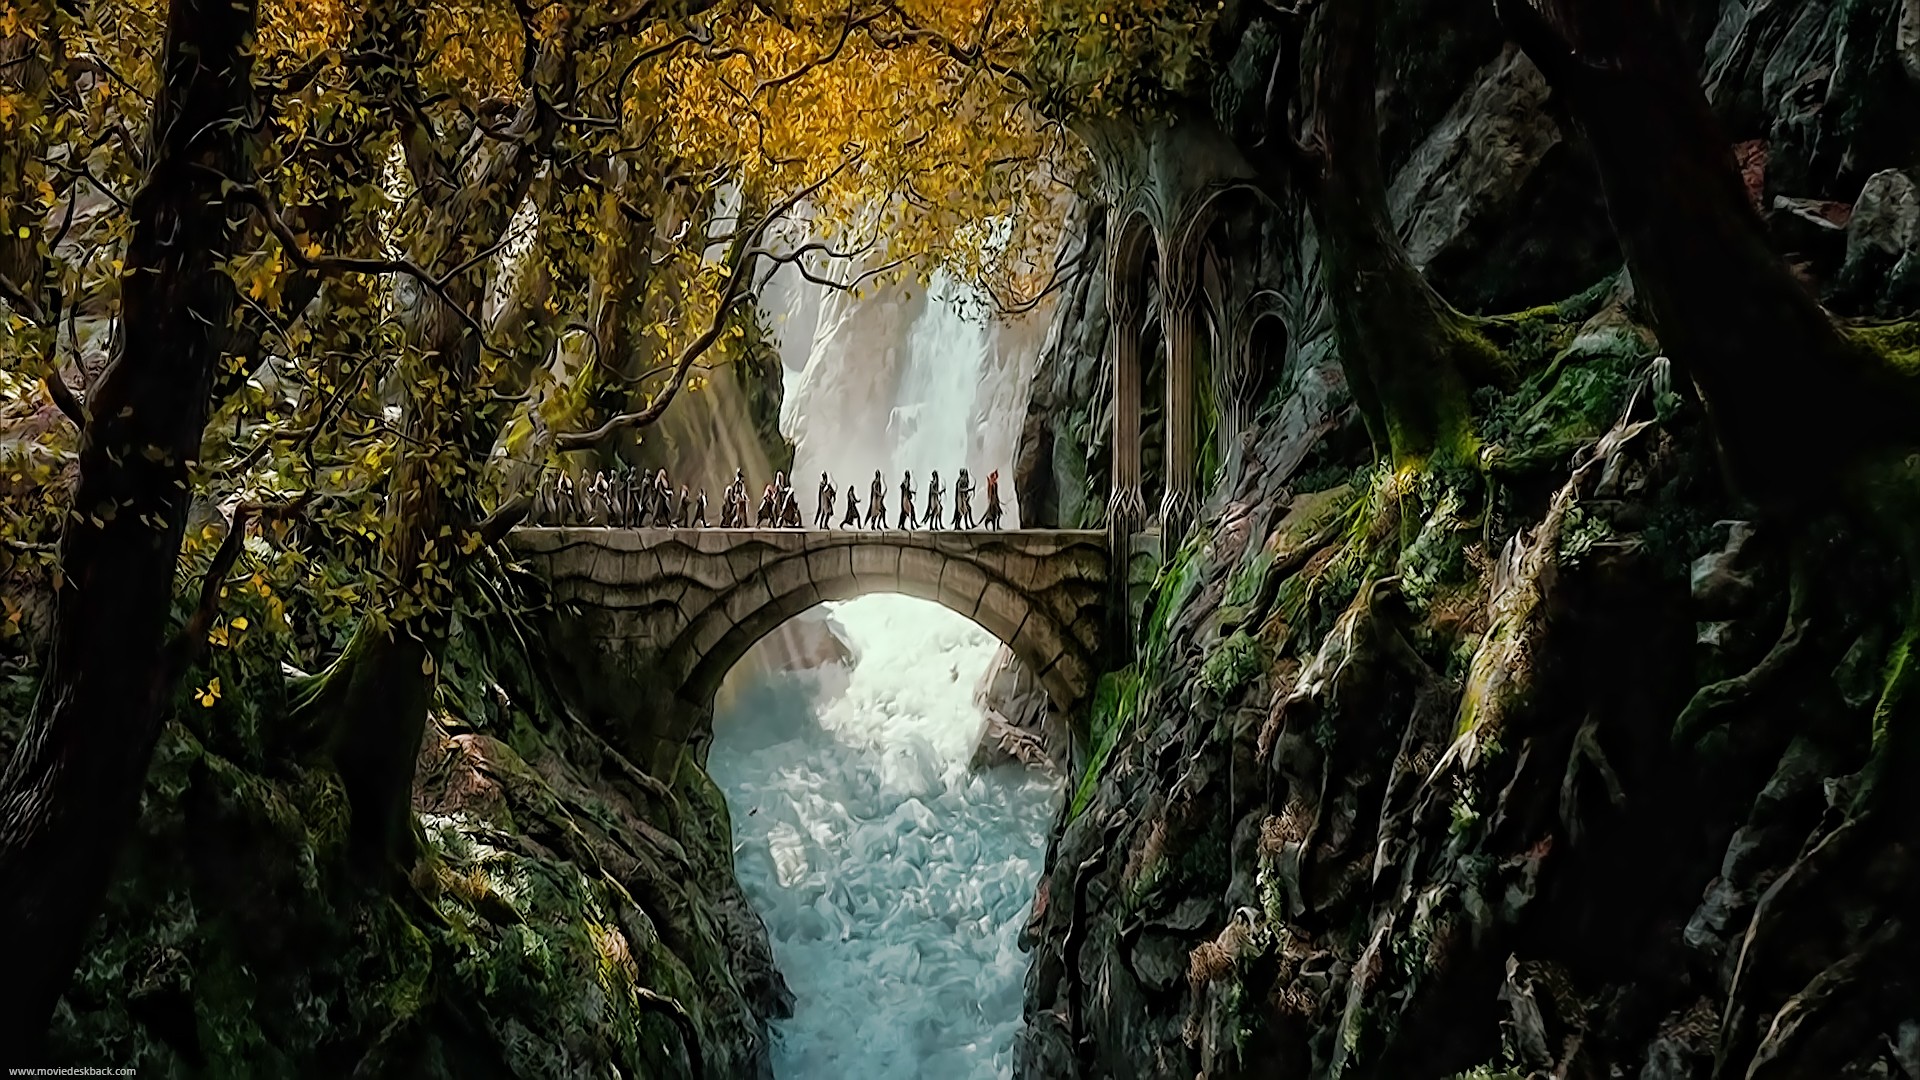 General 1920x1080 movies The Hobbit: The Desolation of Smaug fantasy art Middle-Earth arch forest